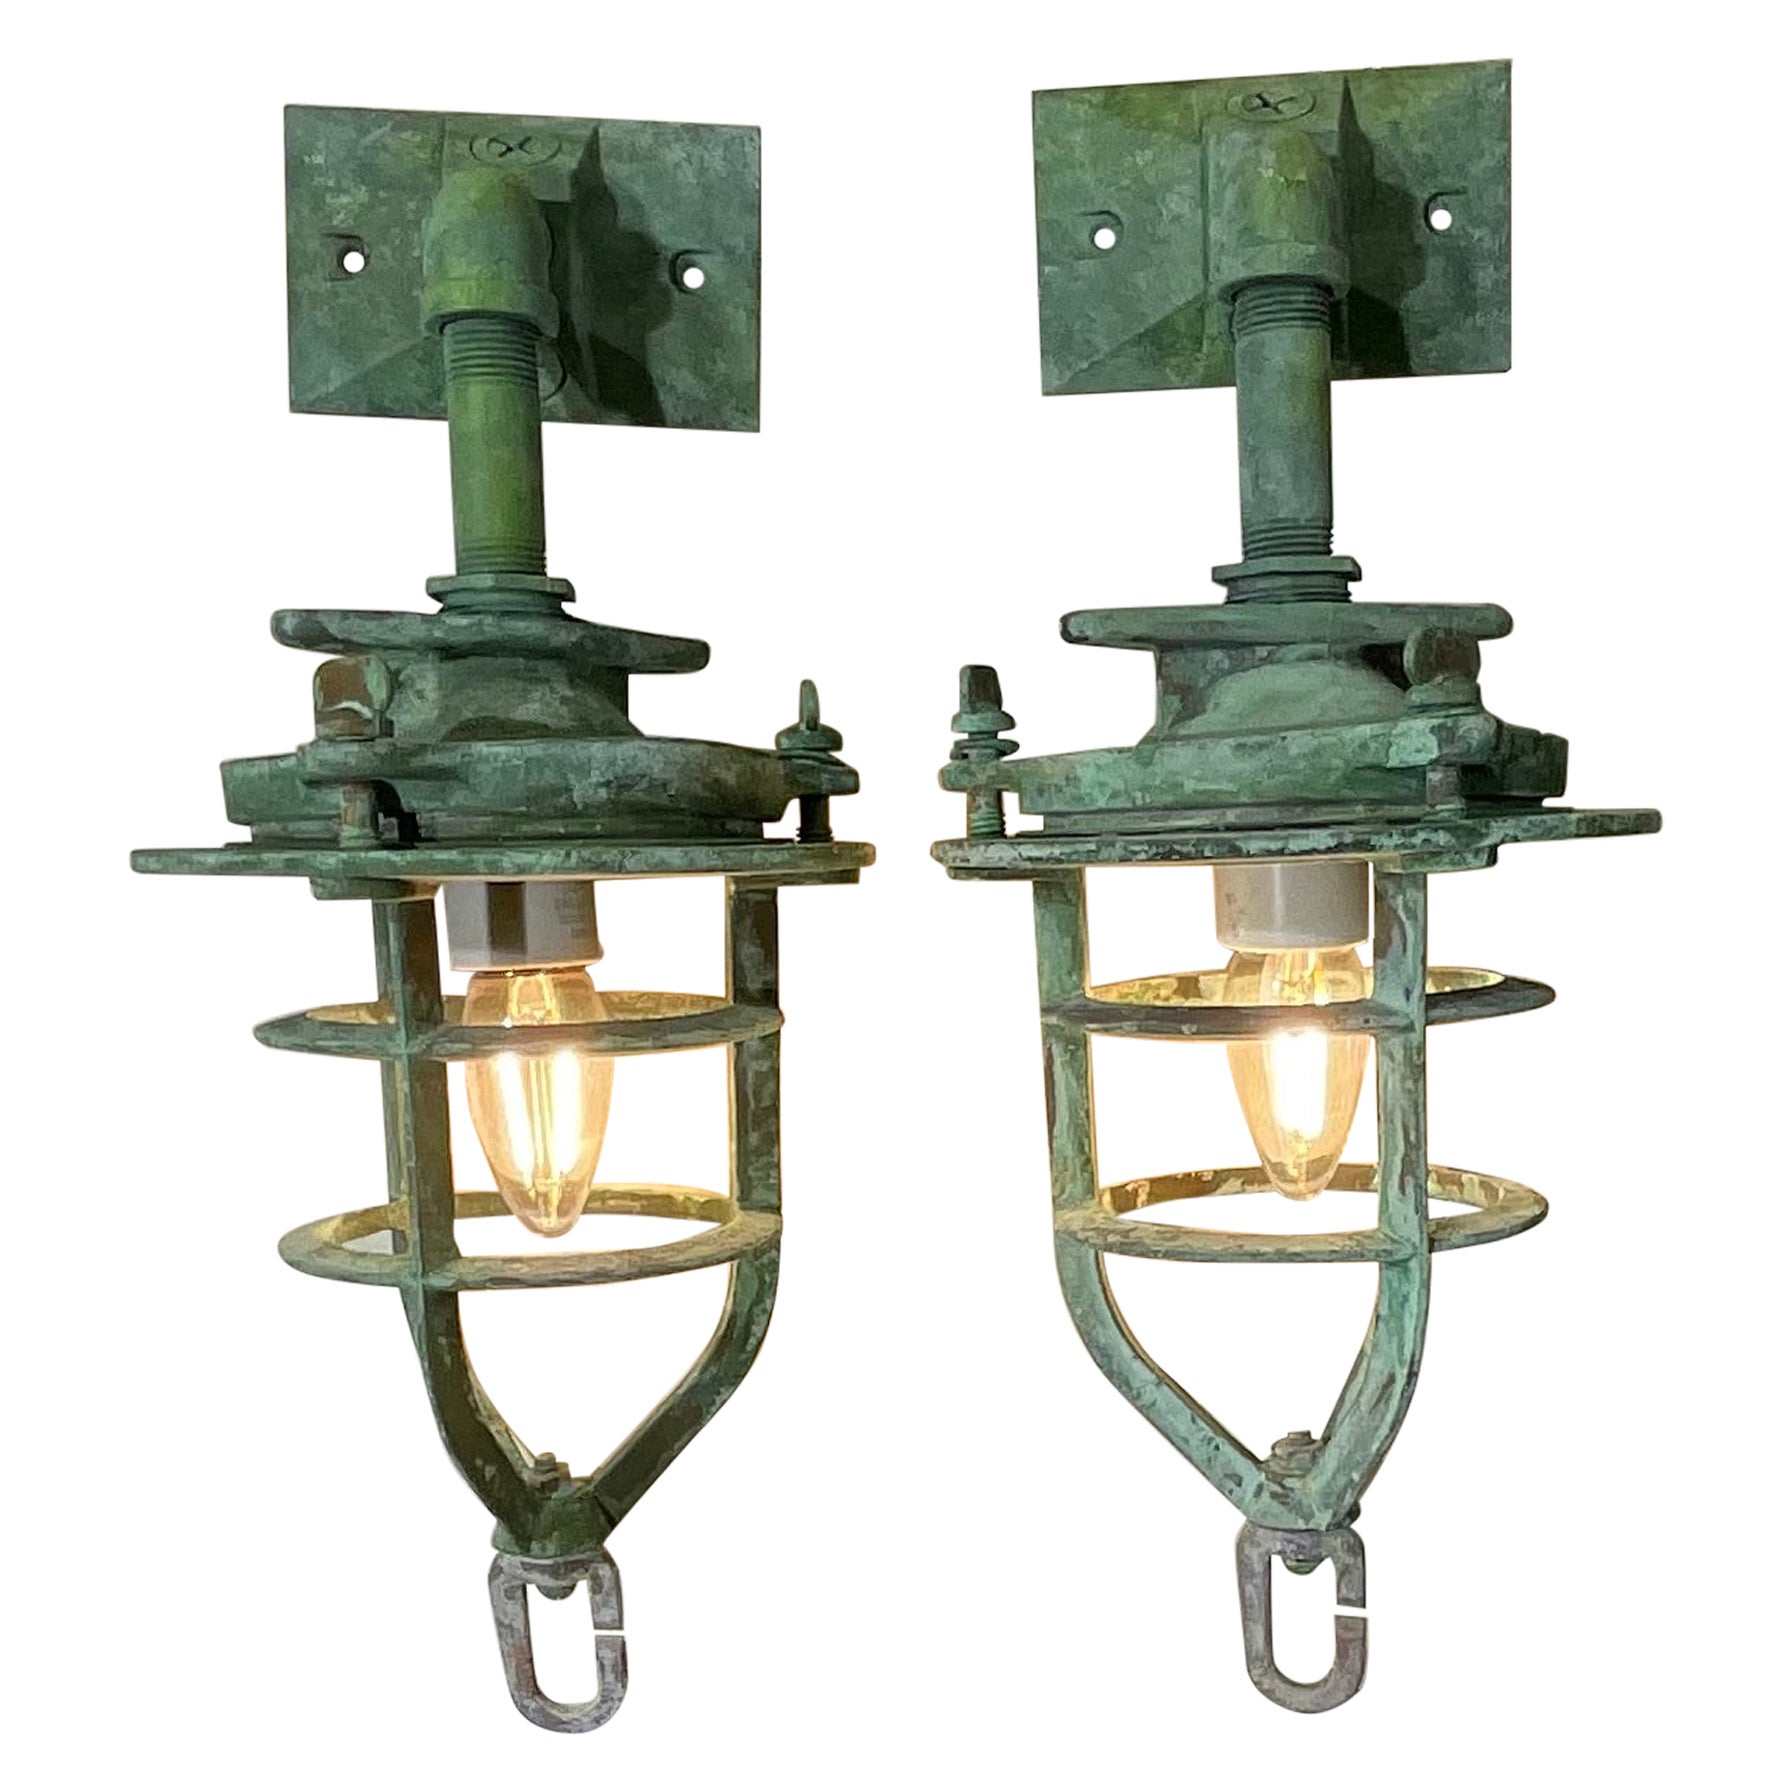 Pair Of Bronze Nautical Marine wall sconces, or Convoy Lights